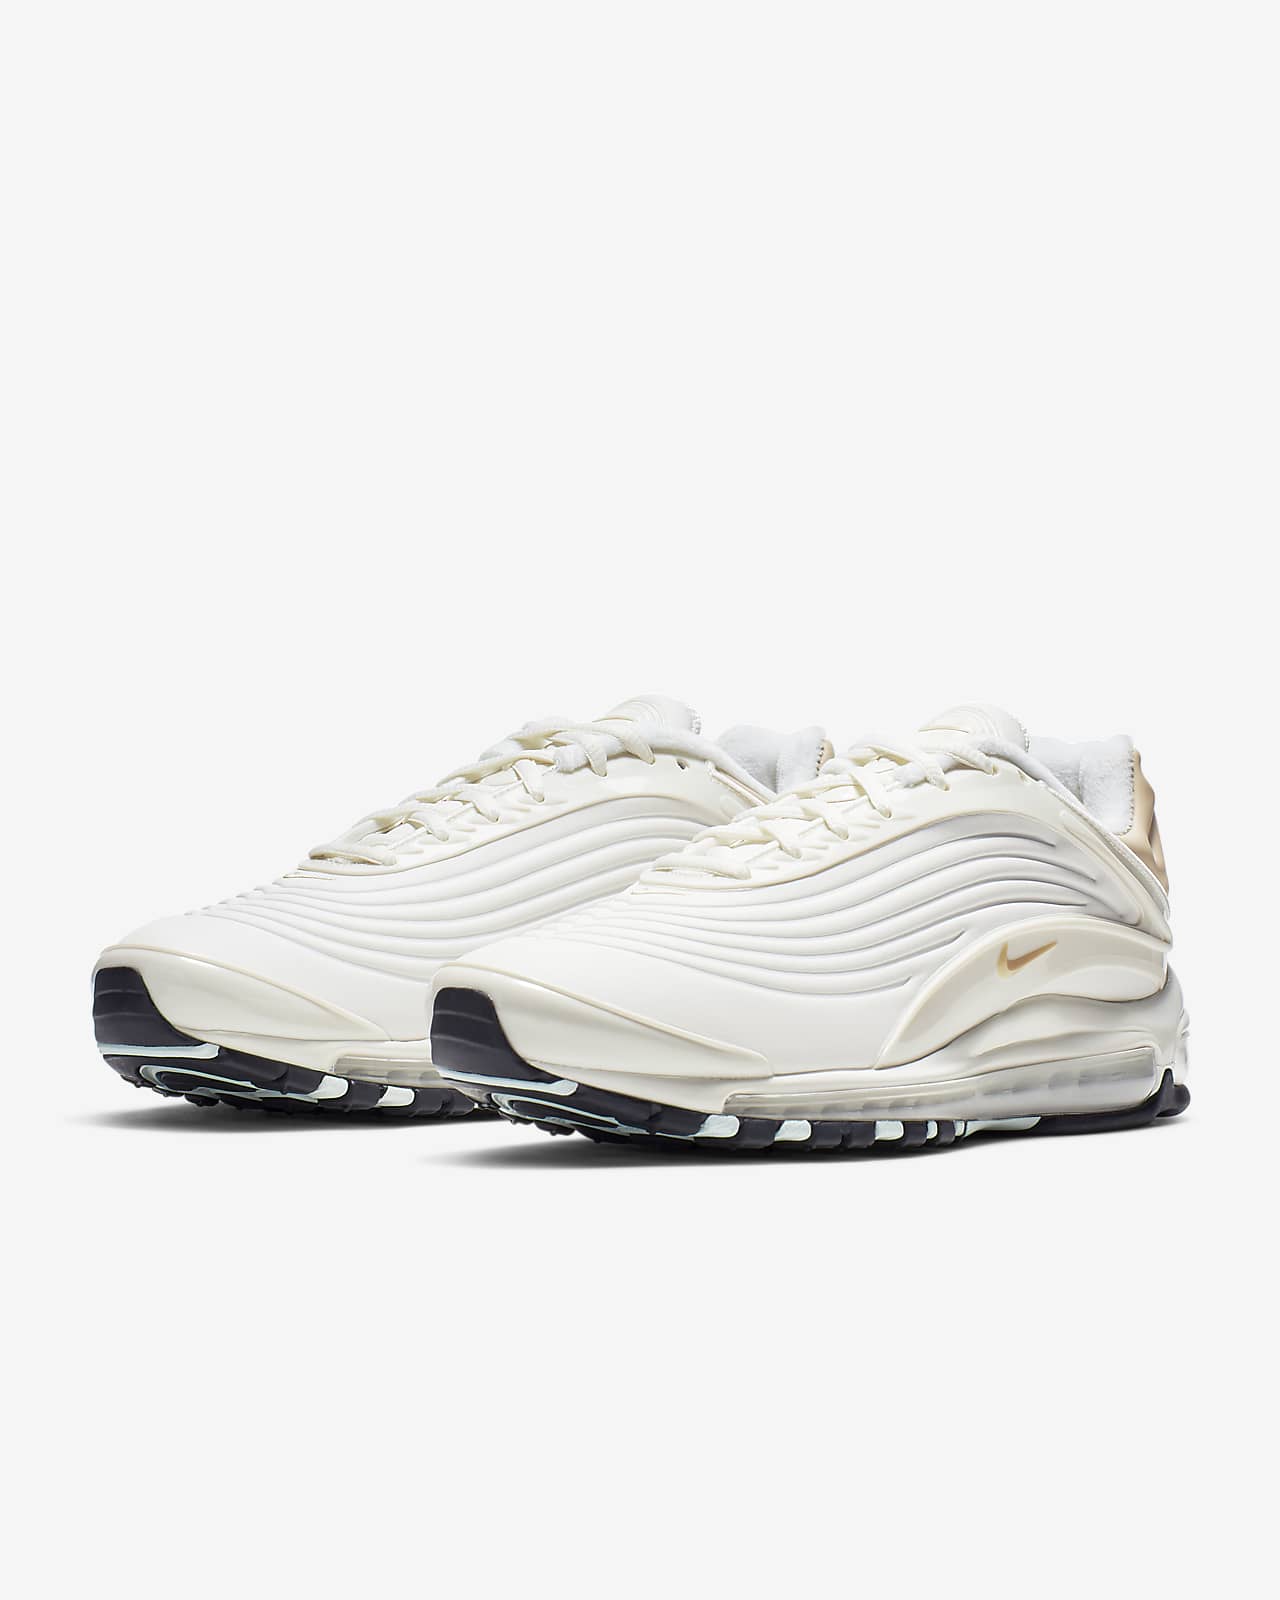 nike air max deluxe se women's shoe